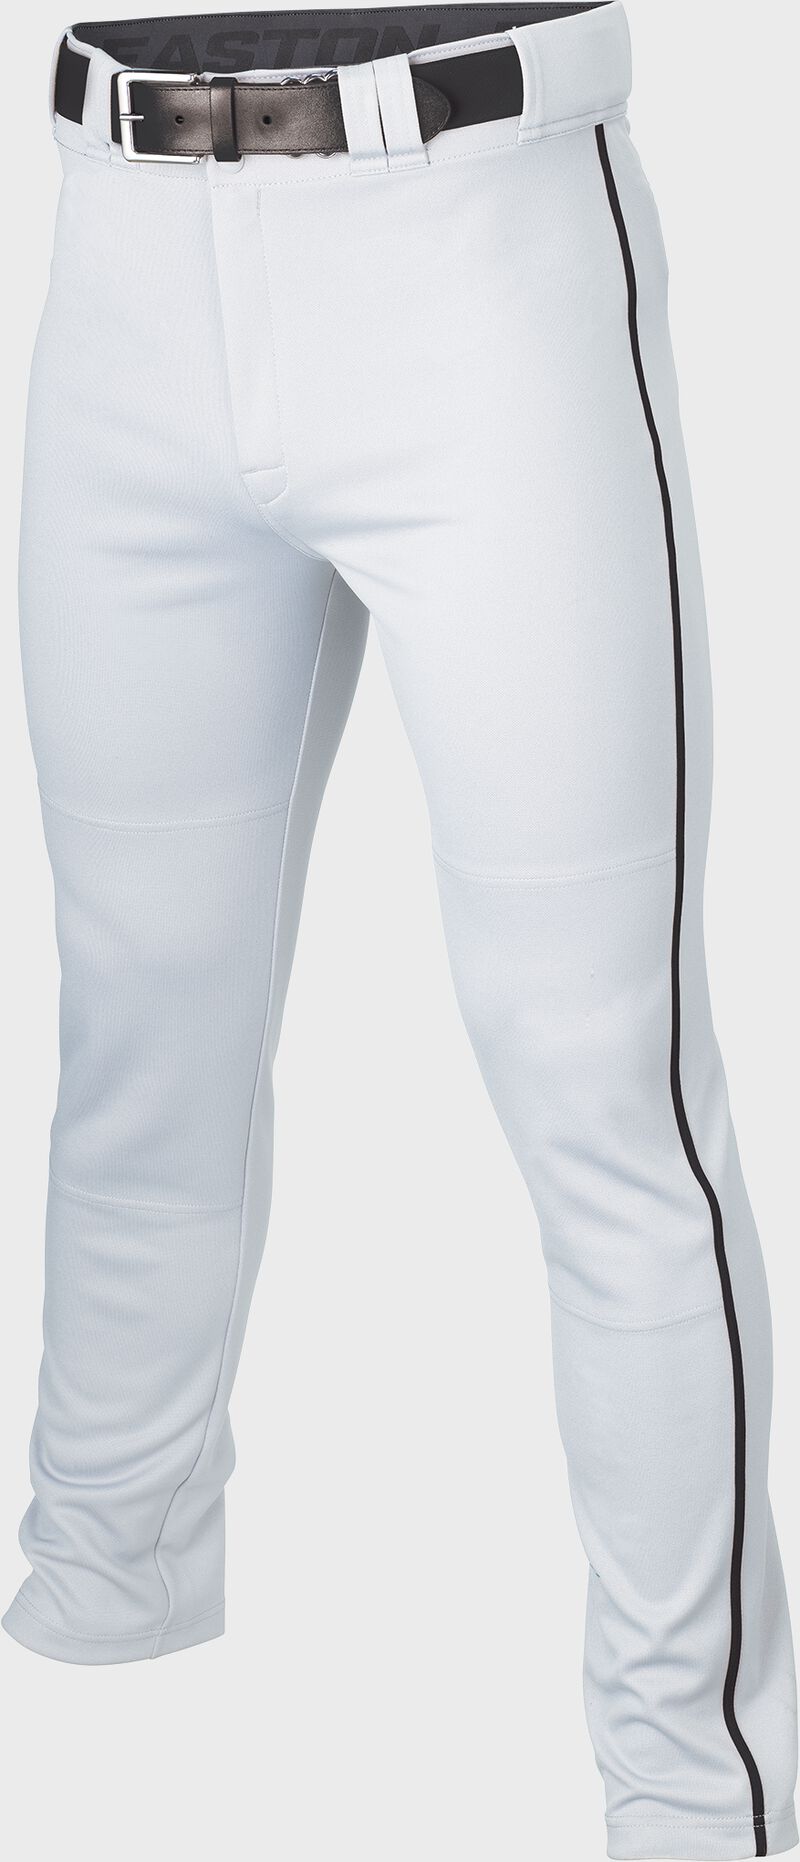 RIVAL+ PANT ADULT PIPED WHITE/BLACK XXL loading=